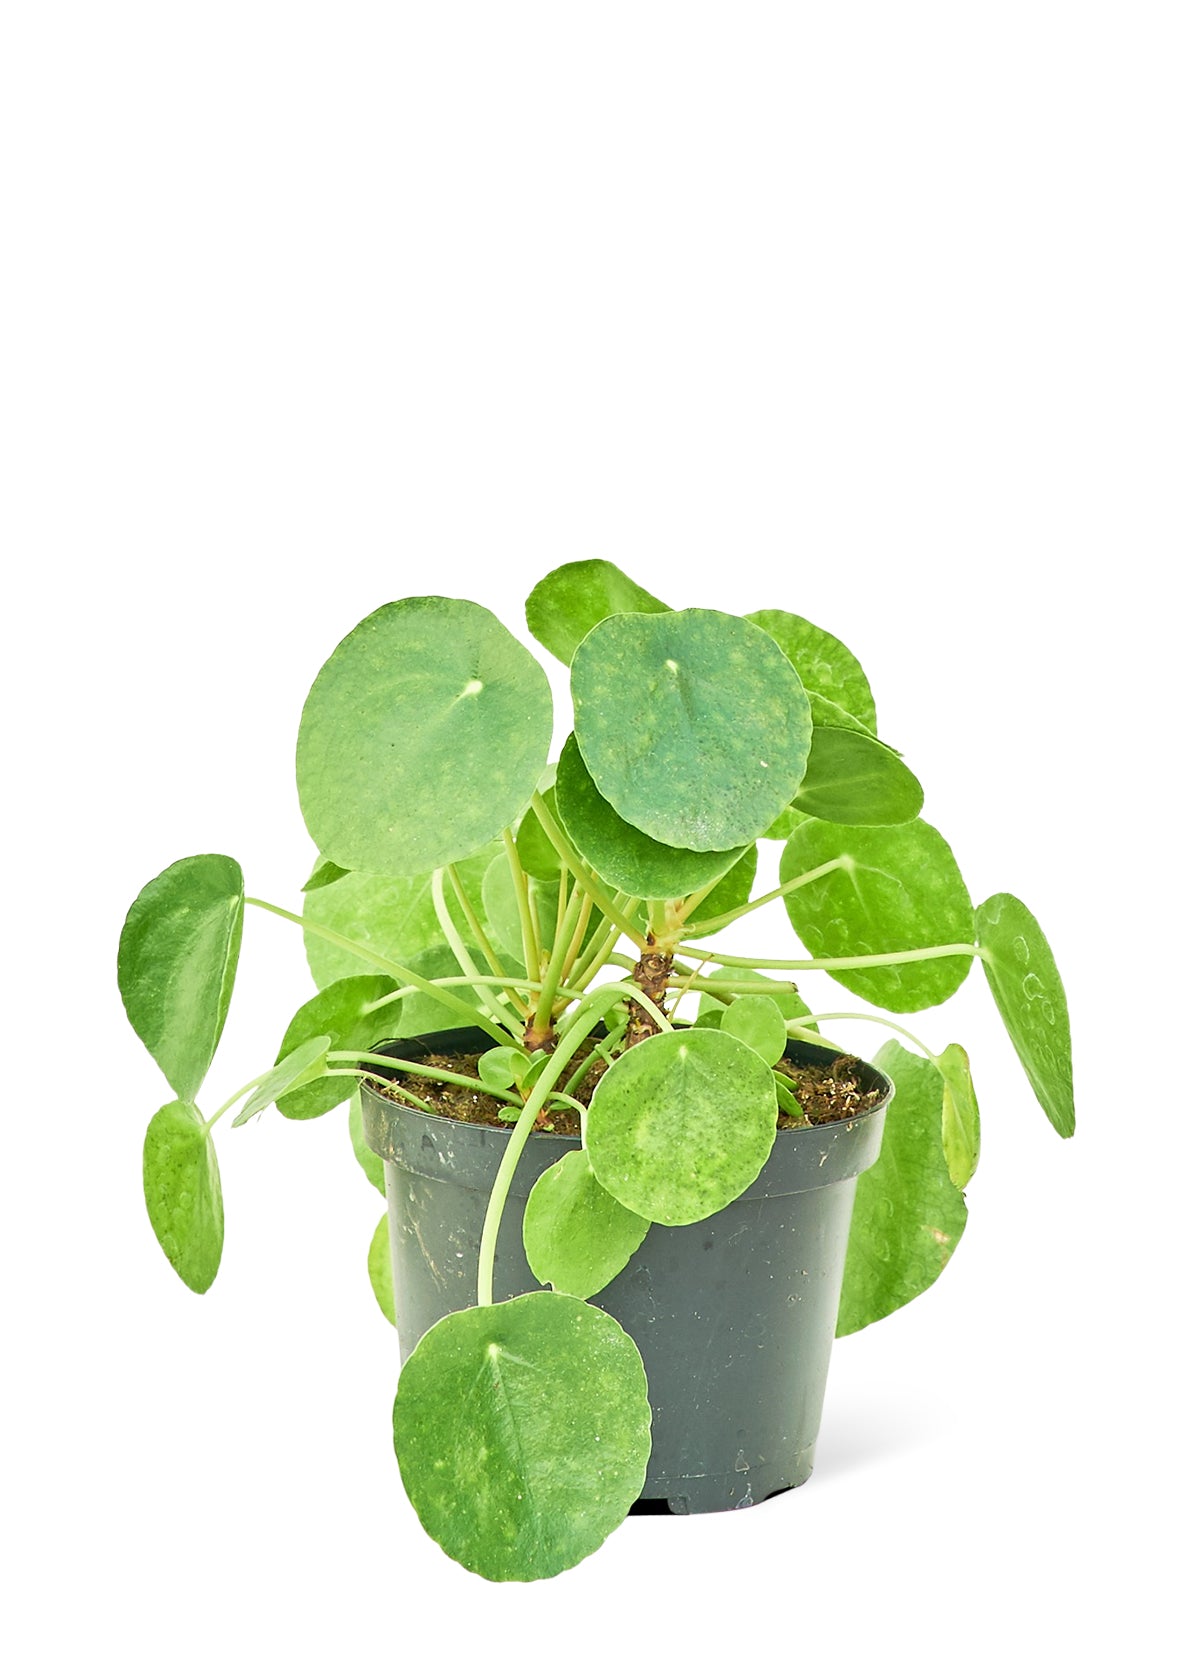 Medium size Chinese Money Plant in a growers pot with a white background